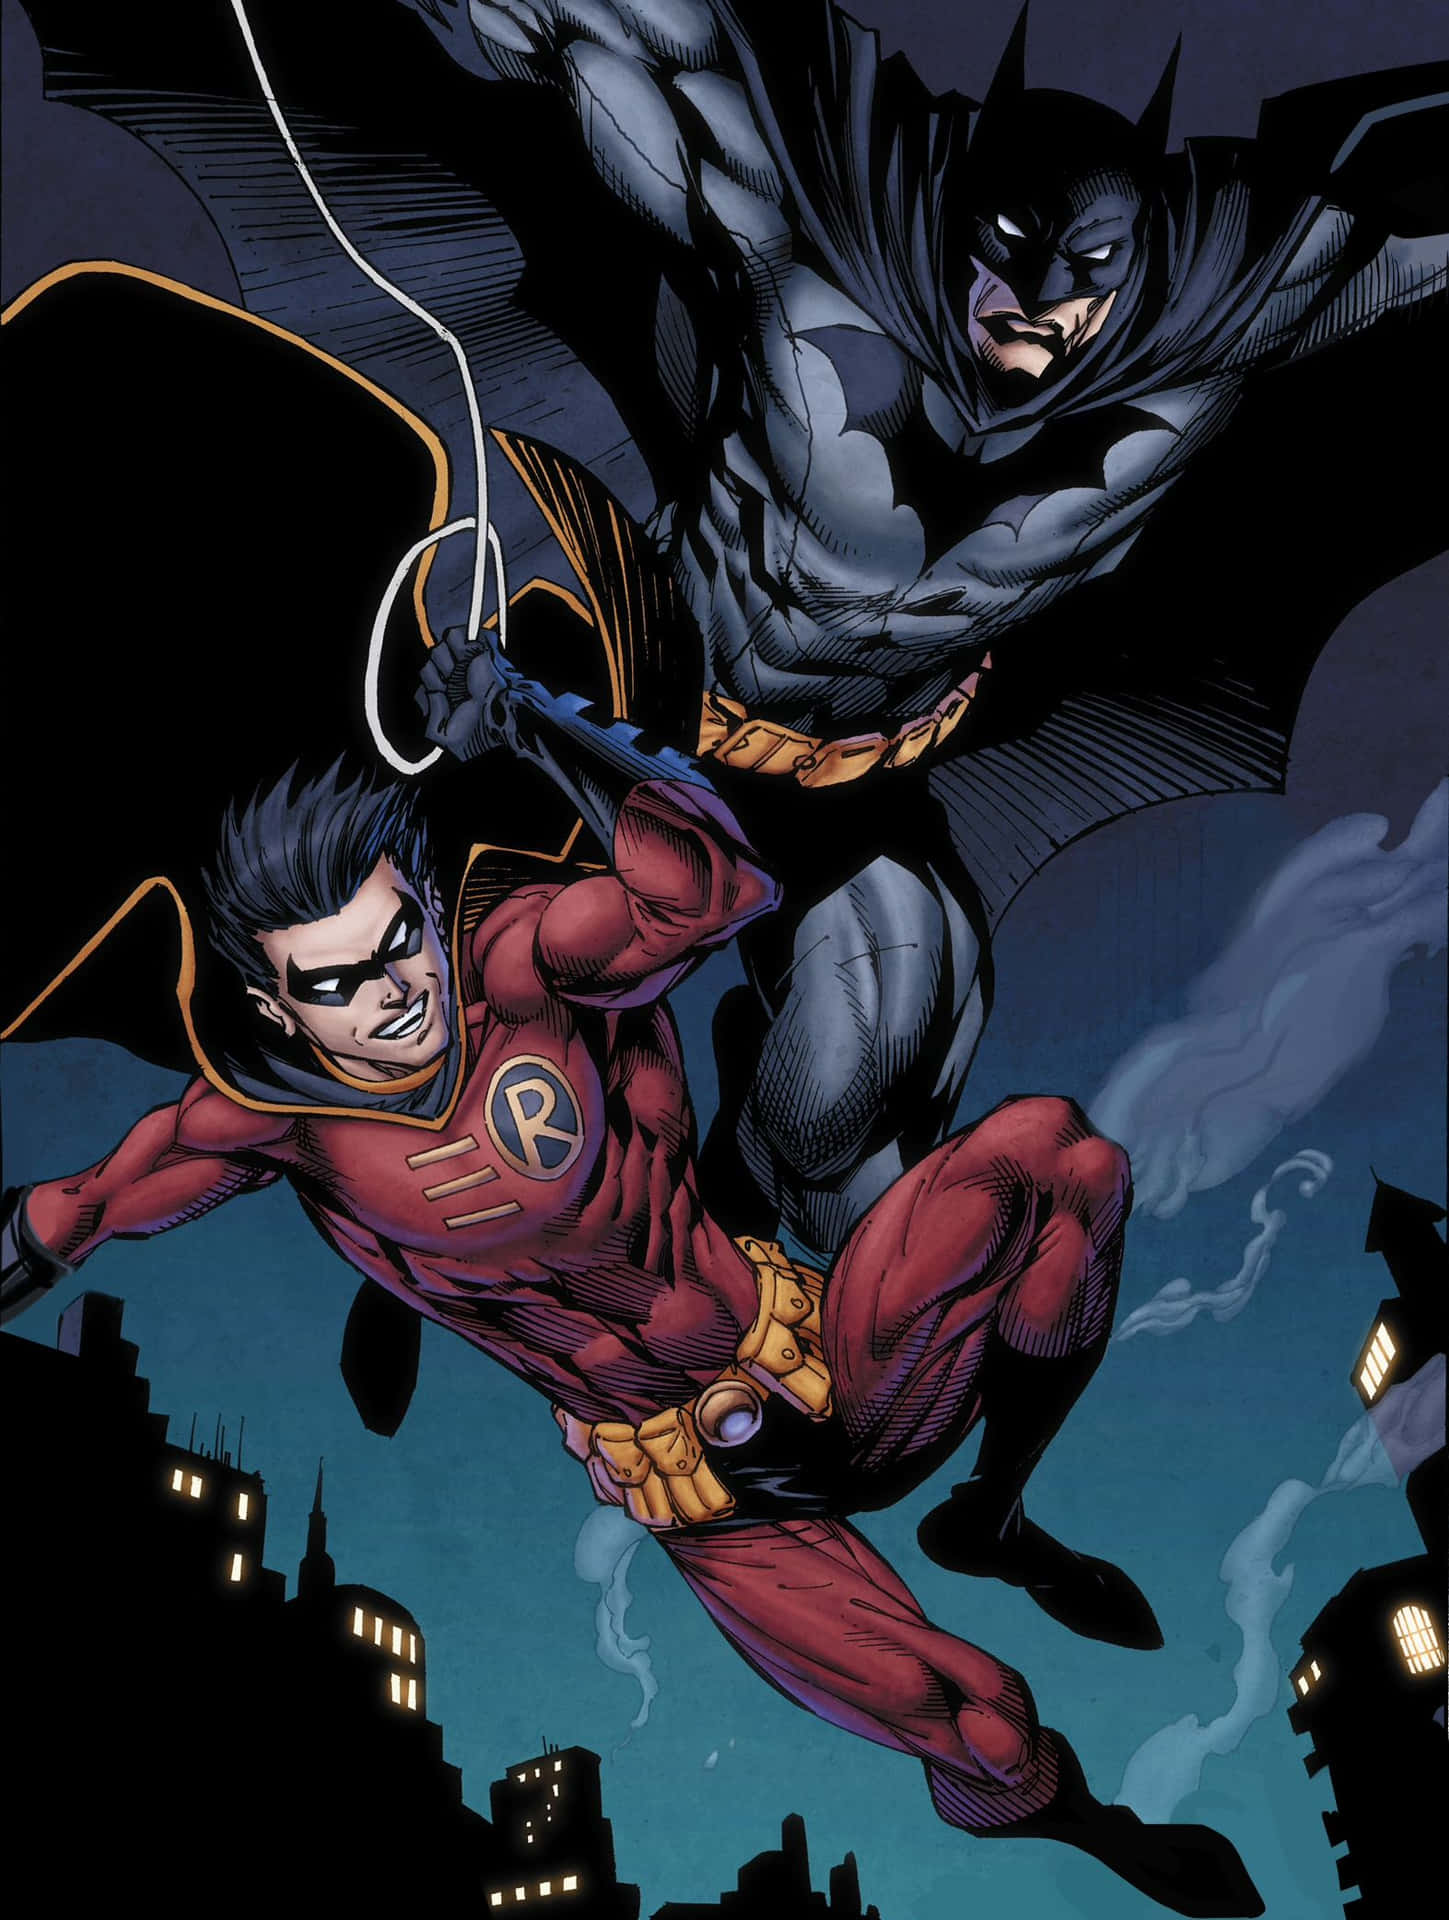 Tim Drake donning his Red Robin outfit, ready for action Wallpaper